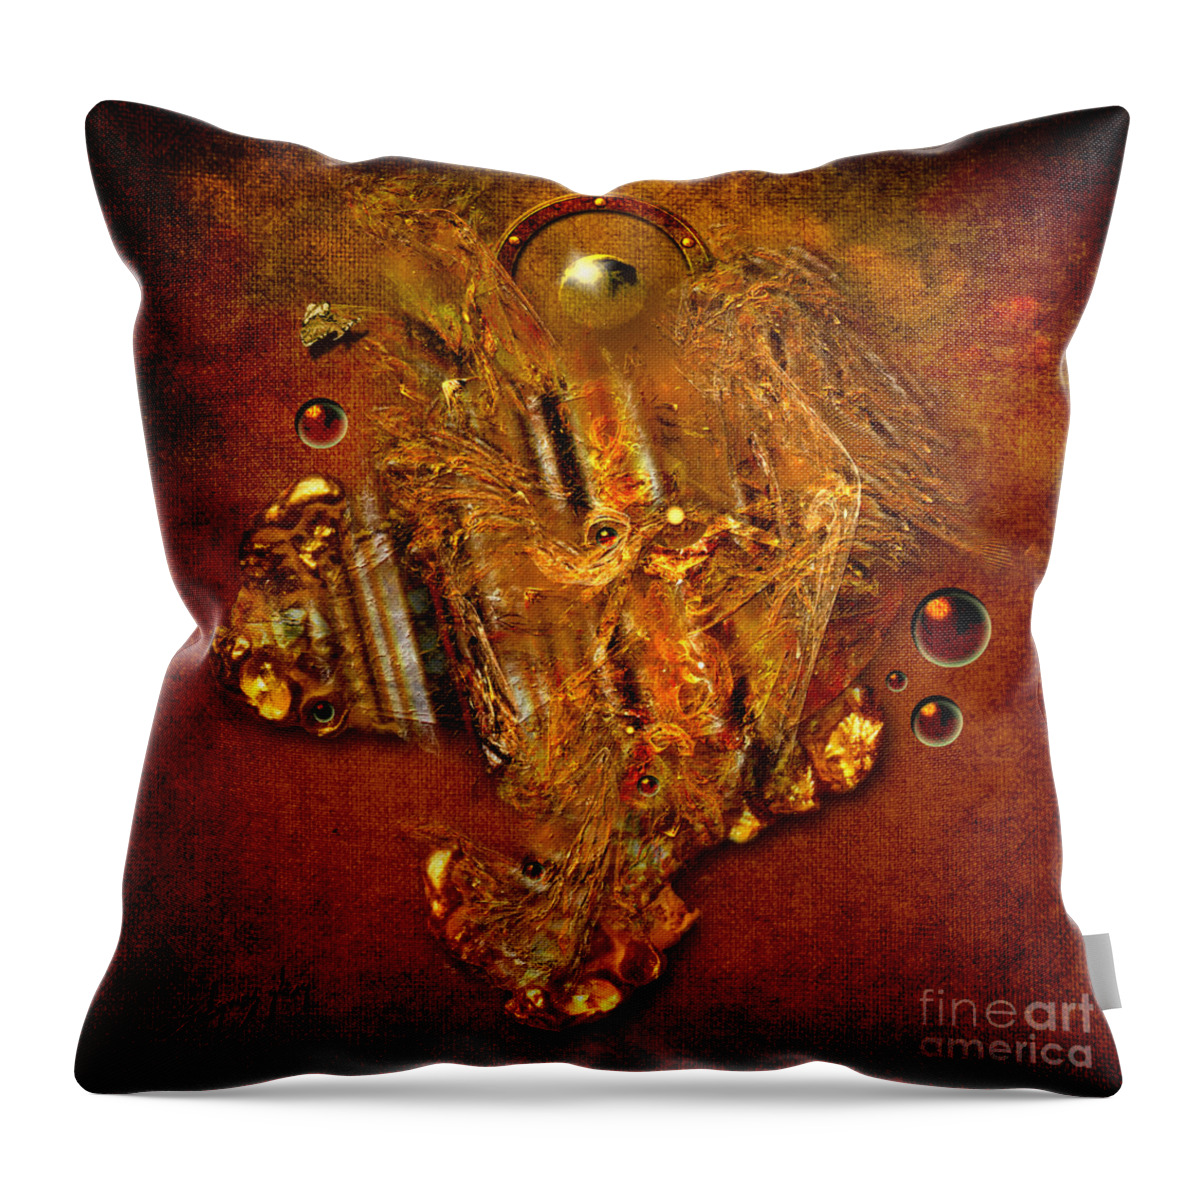 Angel Throw Pillow featuring the painting Gold Angel by Alexa Szlavics